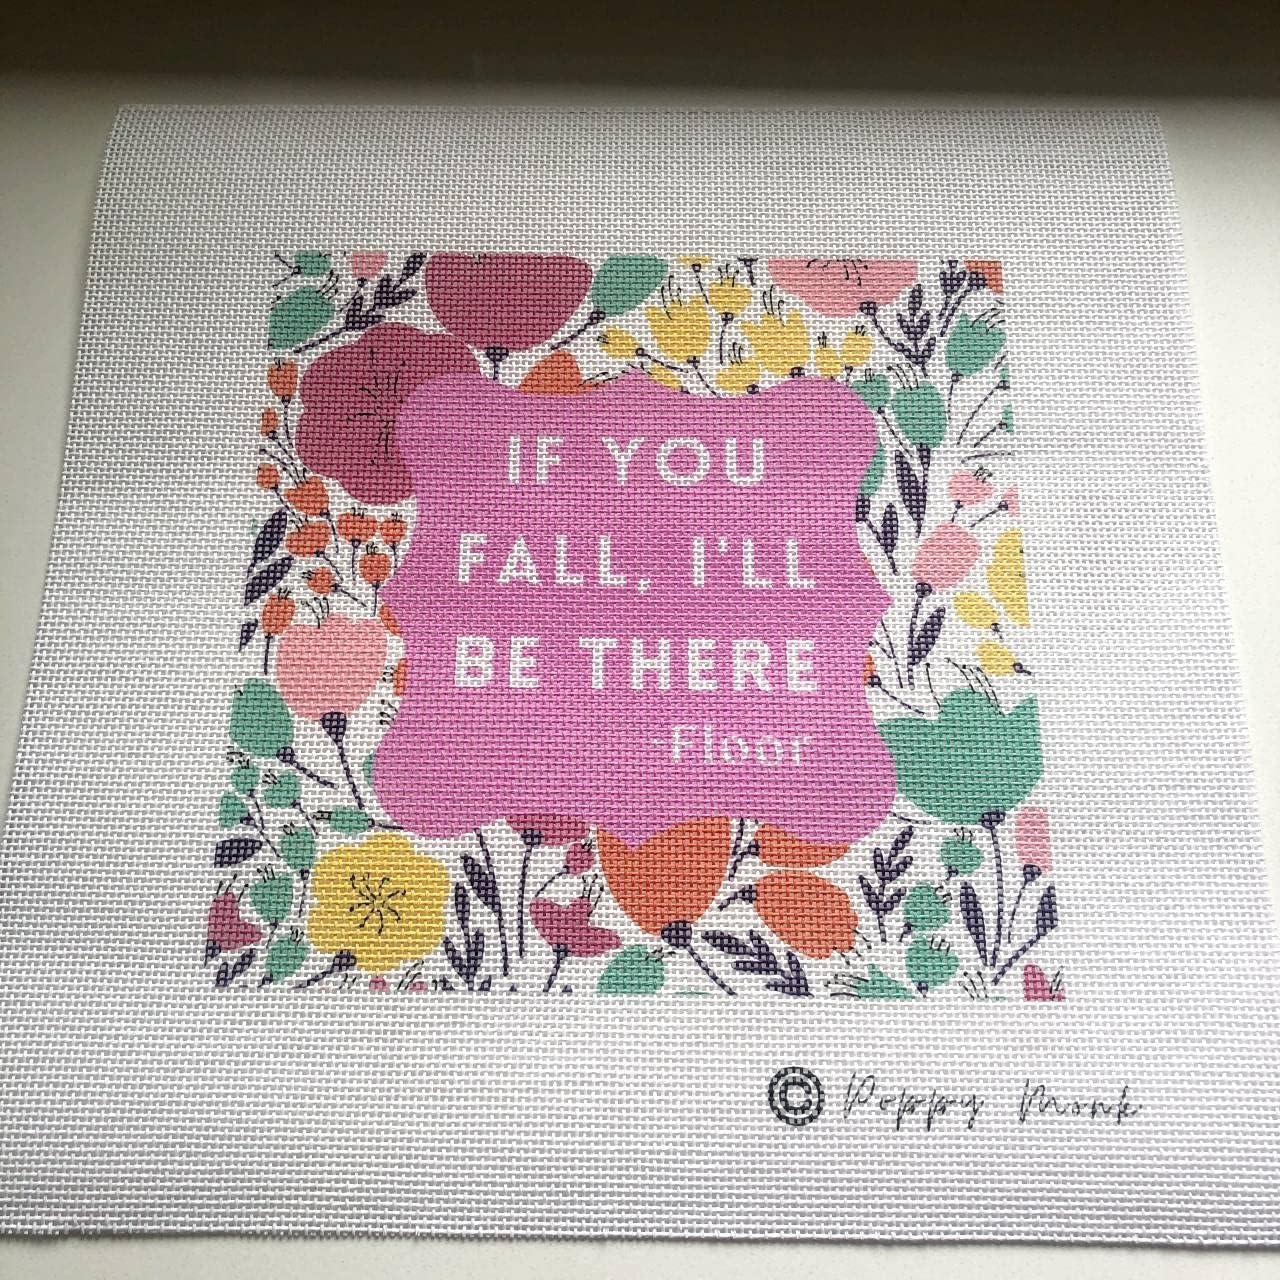 Needlepoint Canvas for Adults with a Sassy Saying and Bright